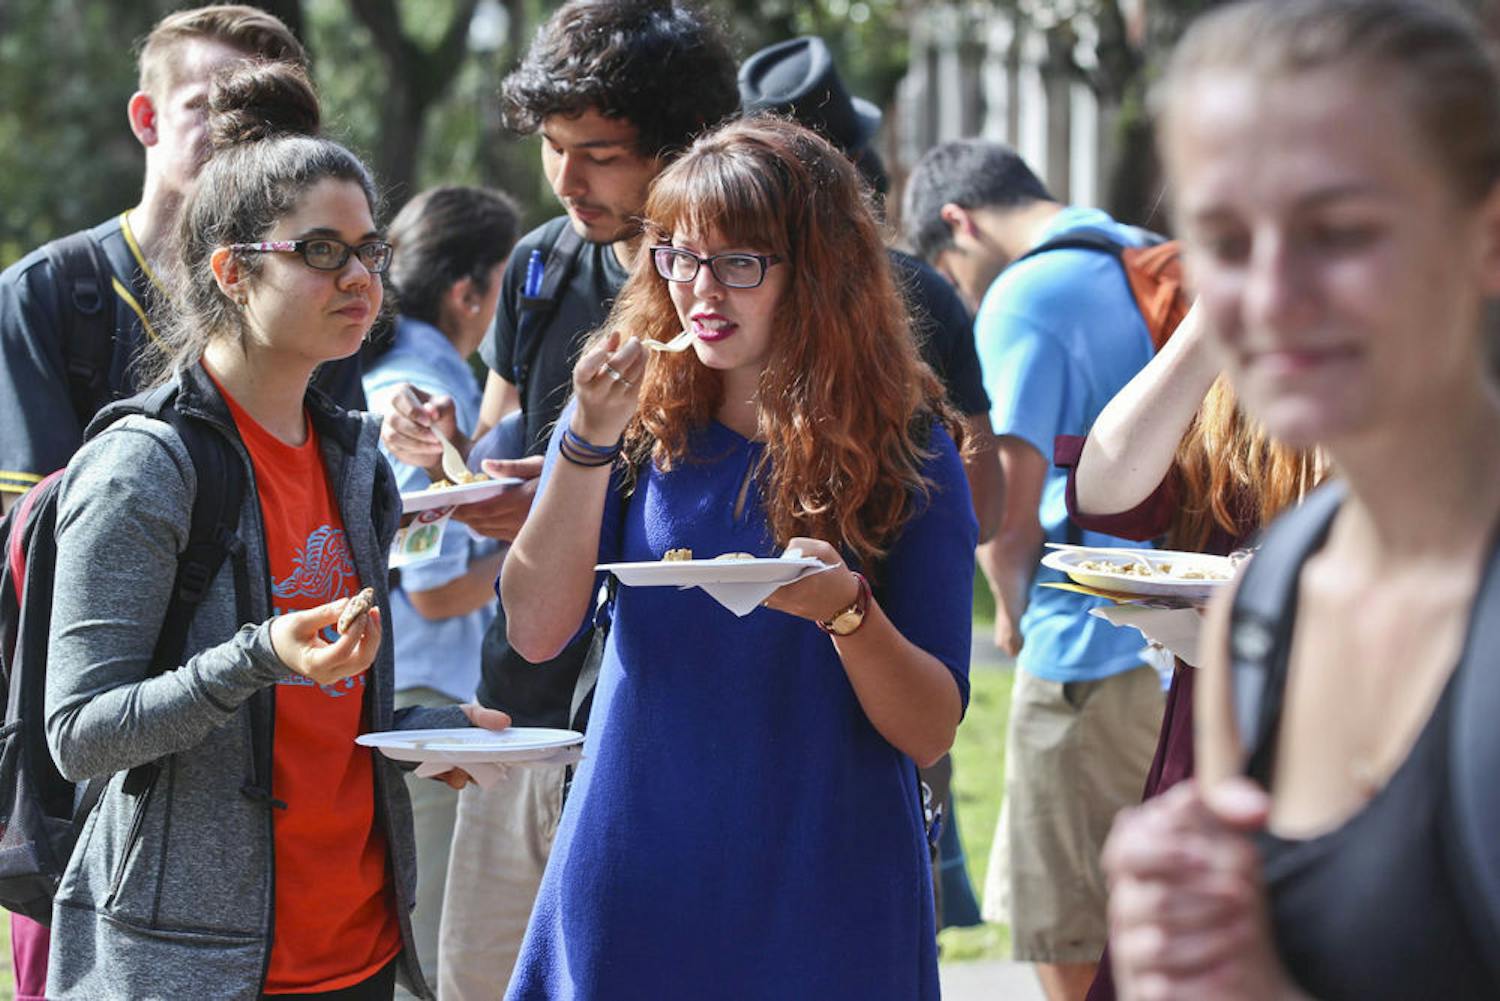 McShane Ingalls, left, a 20-year-old UF nutritional sciences junior, and Kristen Ratliff, a 21-year-old political science senior, eat a vegan Thanksgiving meal at the Plaza of the Americas on Nov. 20, 2015. The Student Animal Alliance provided a lunch of Tofurkey, mashed potatoes, gravy and cookies as well as literature on the importance of going vegan.